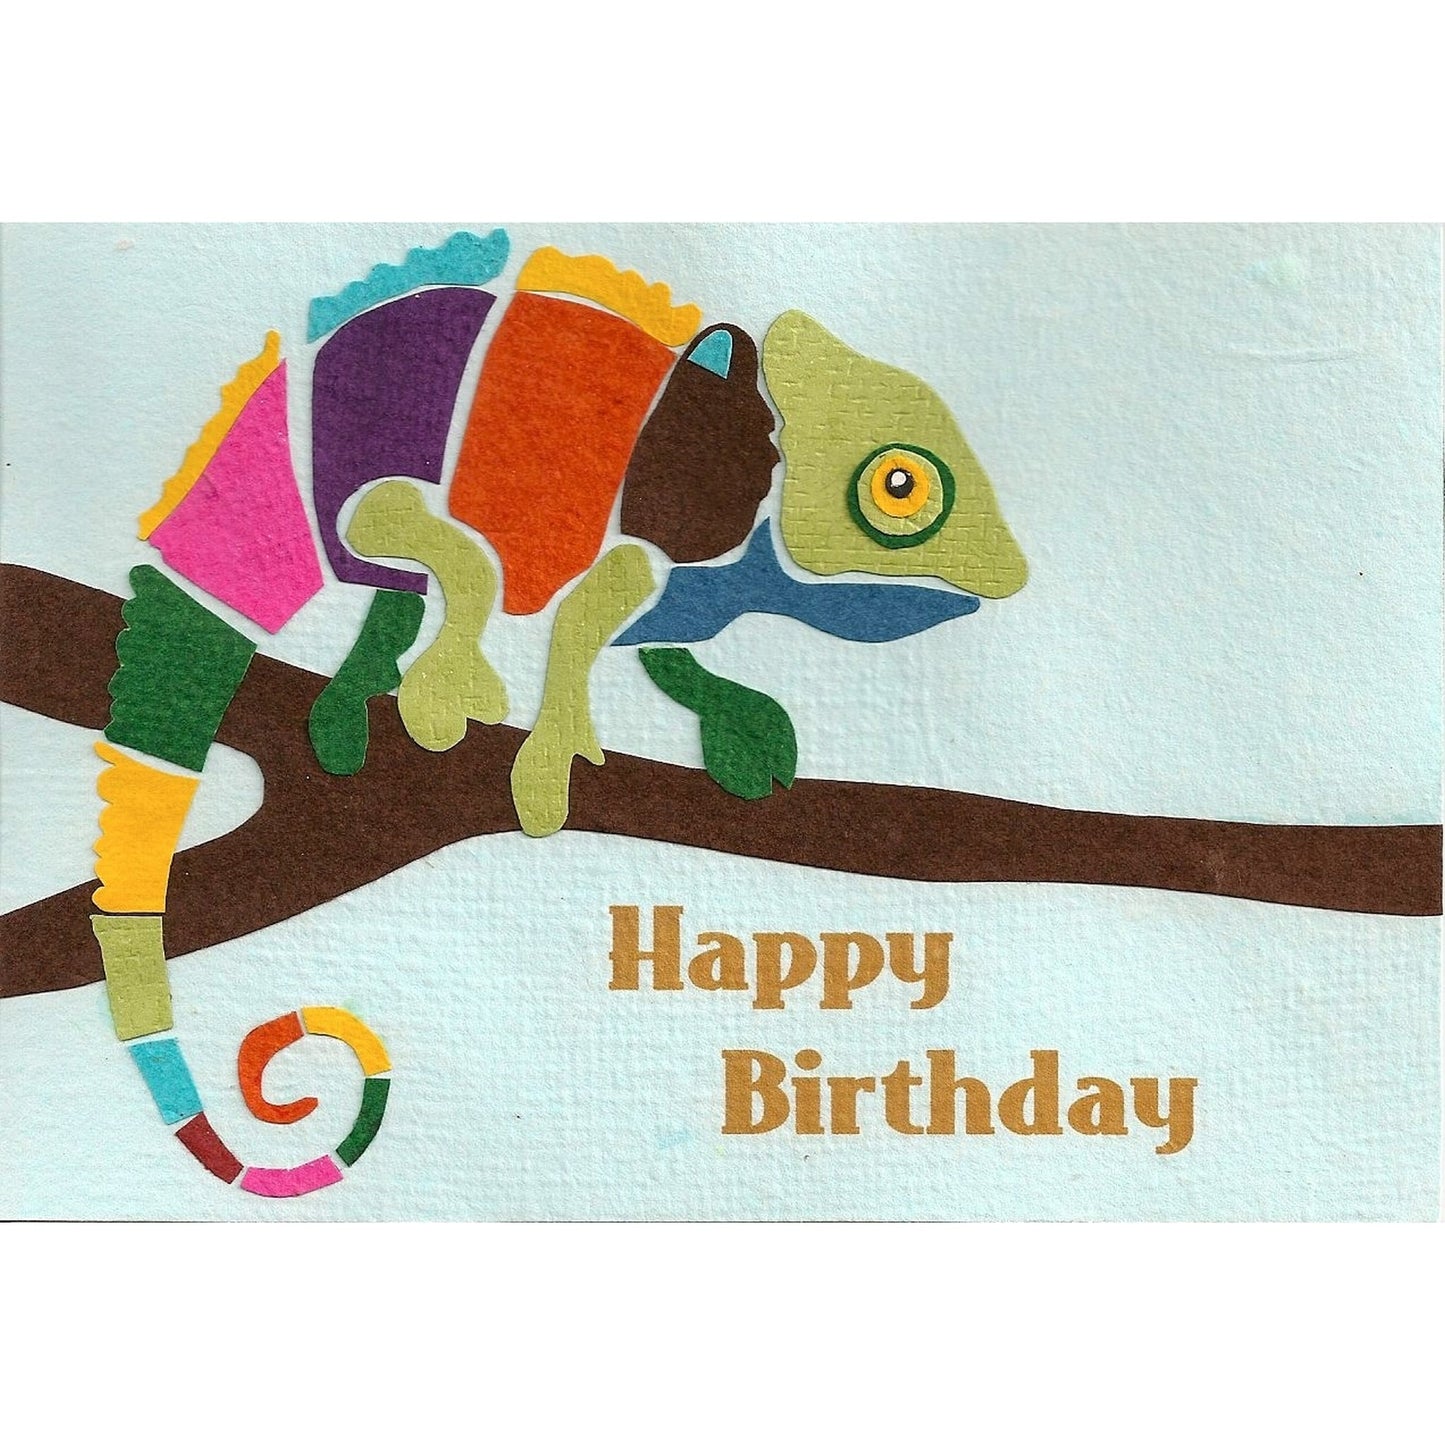 Chameleon handmade and recycled birthday card